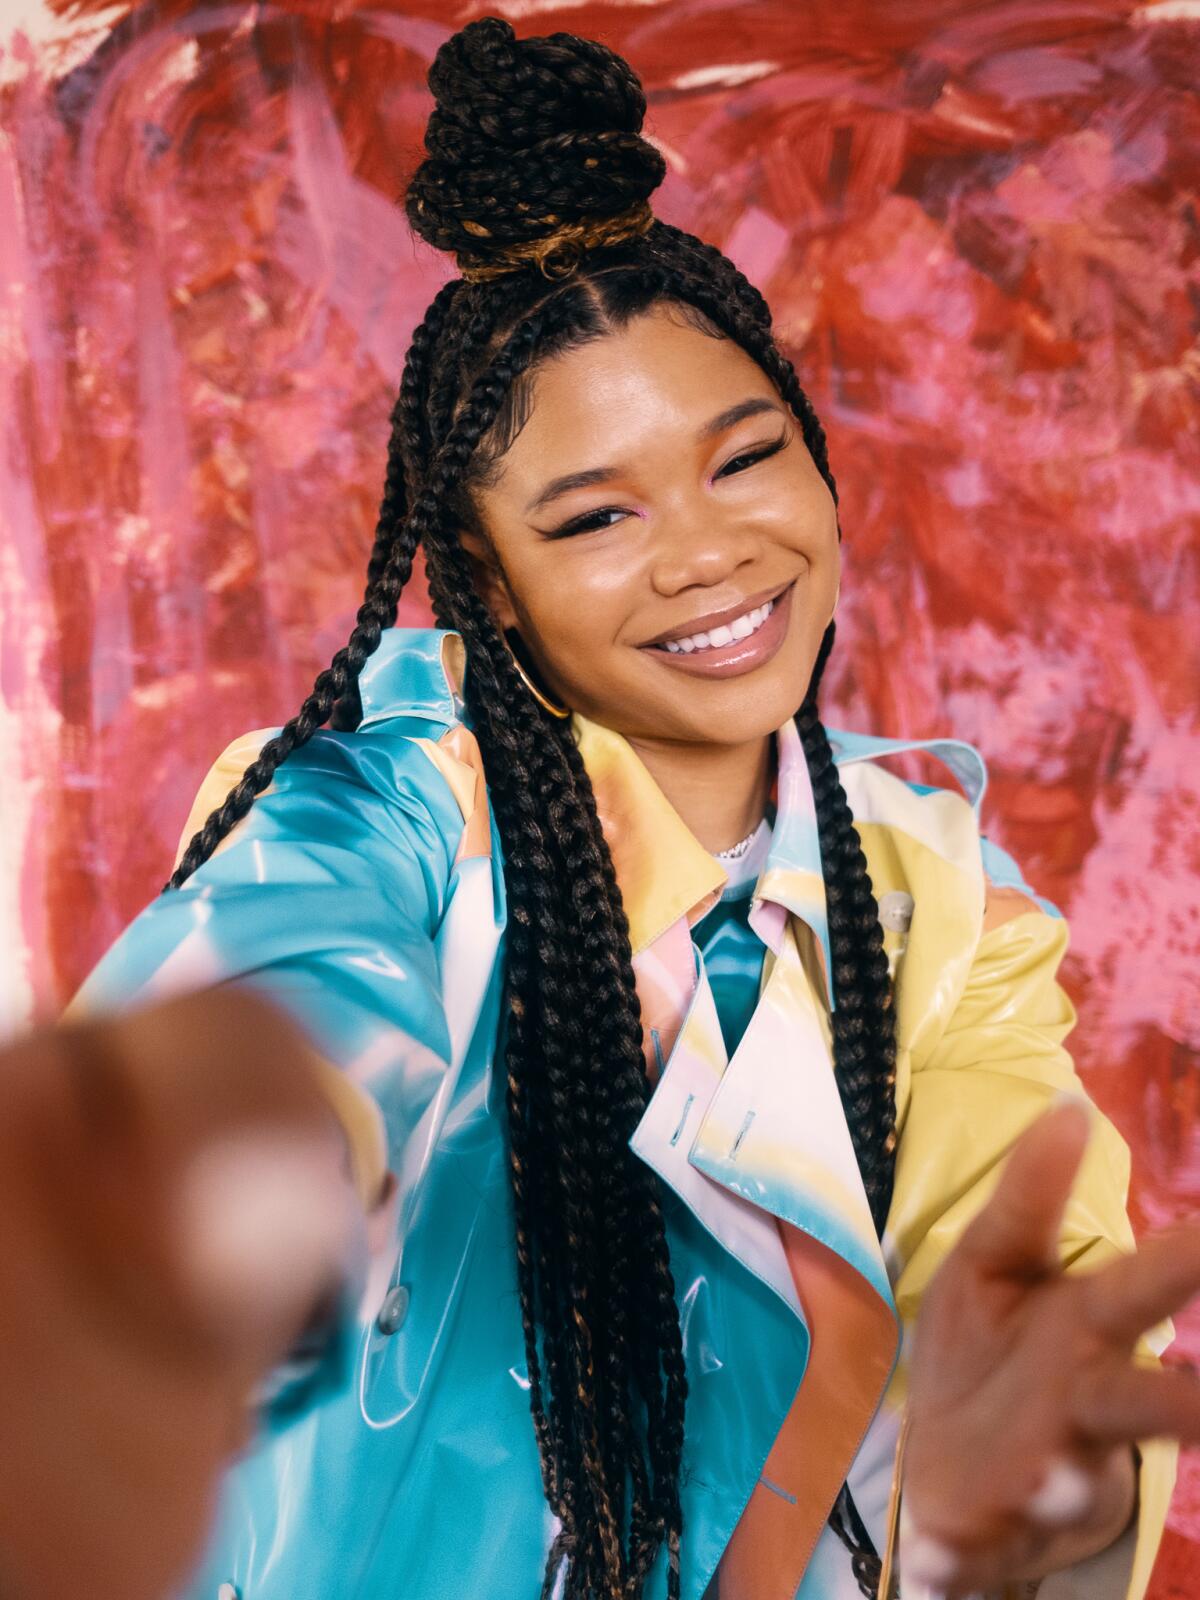  Storm Reid moves her hands toward the camera for a portrait.